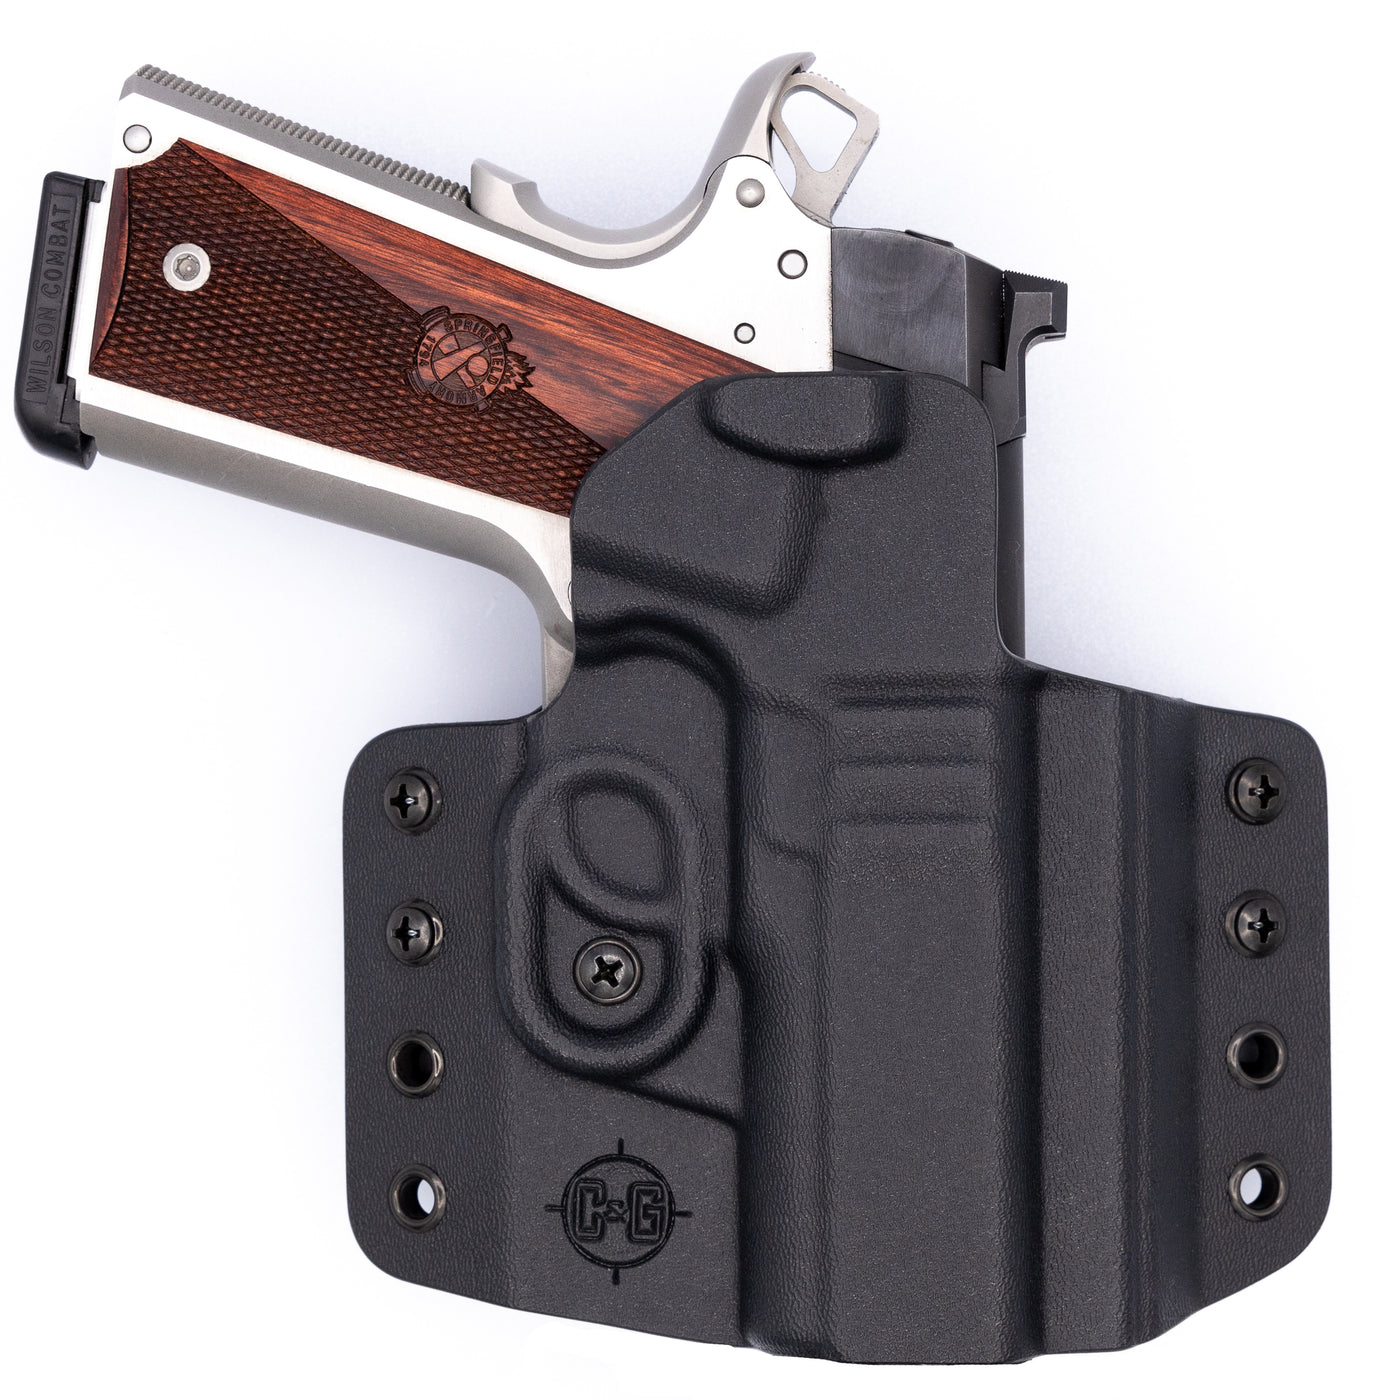 Shown is a quickship C&G Holster Covert series outside the waistband holster for a Kimber Ultra-Carry.